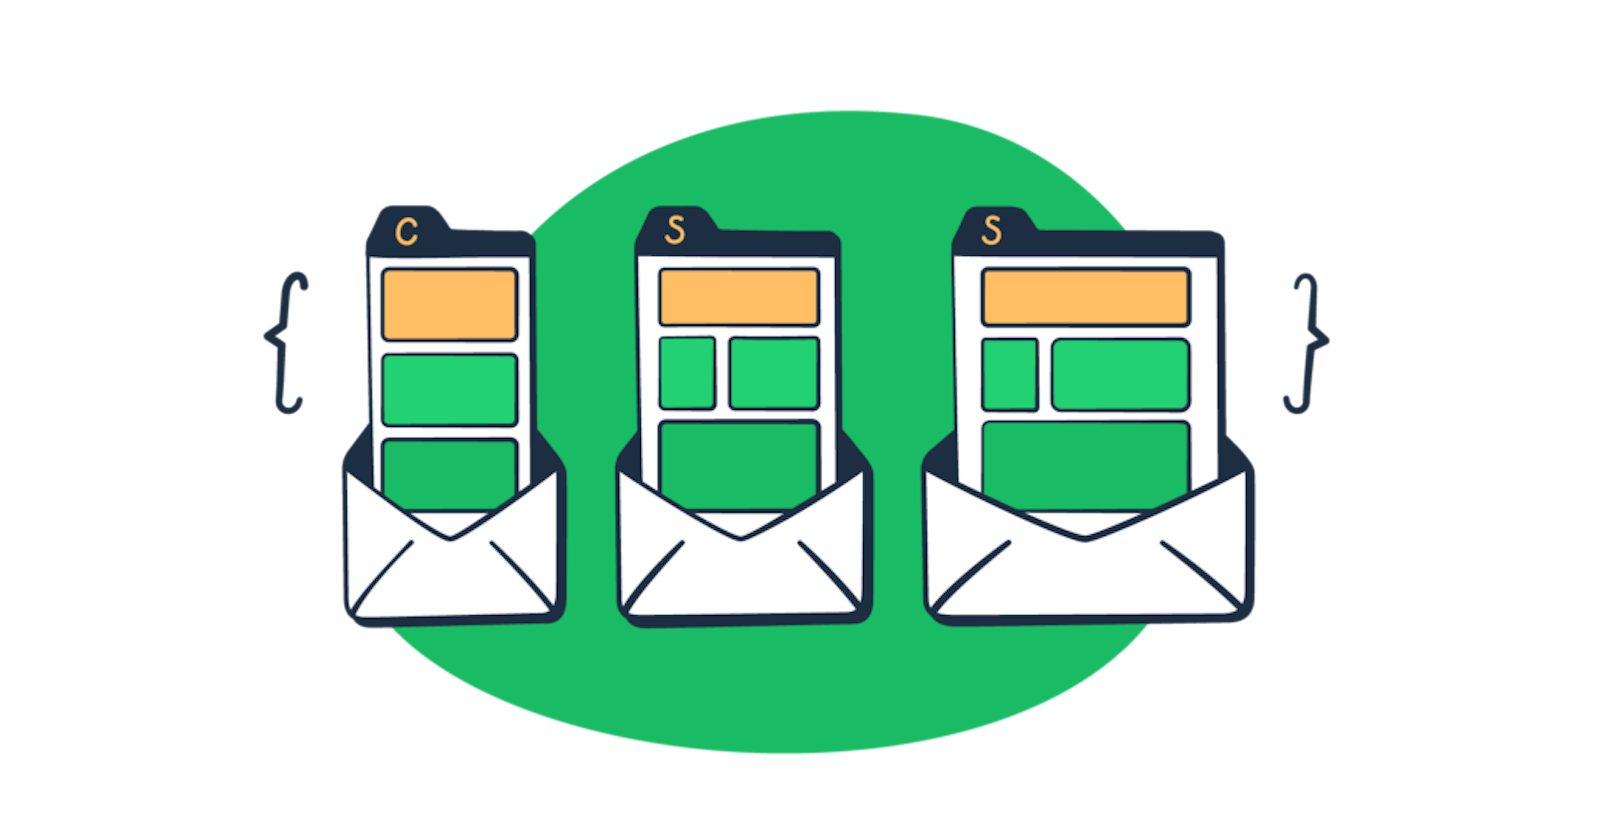 How to Improve Your Emails With CSS?